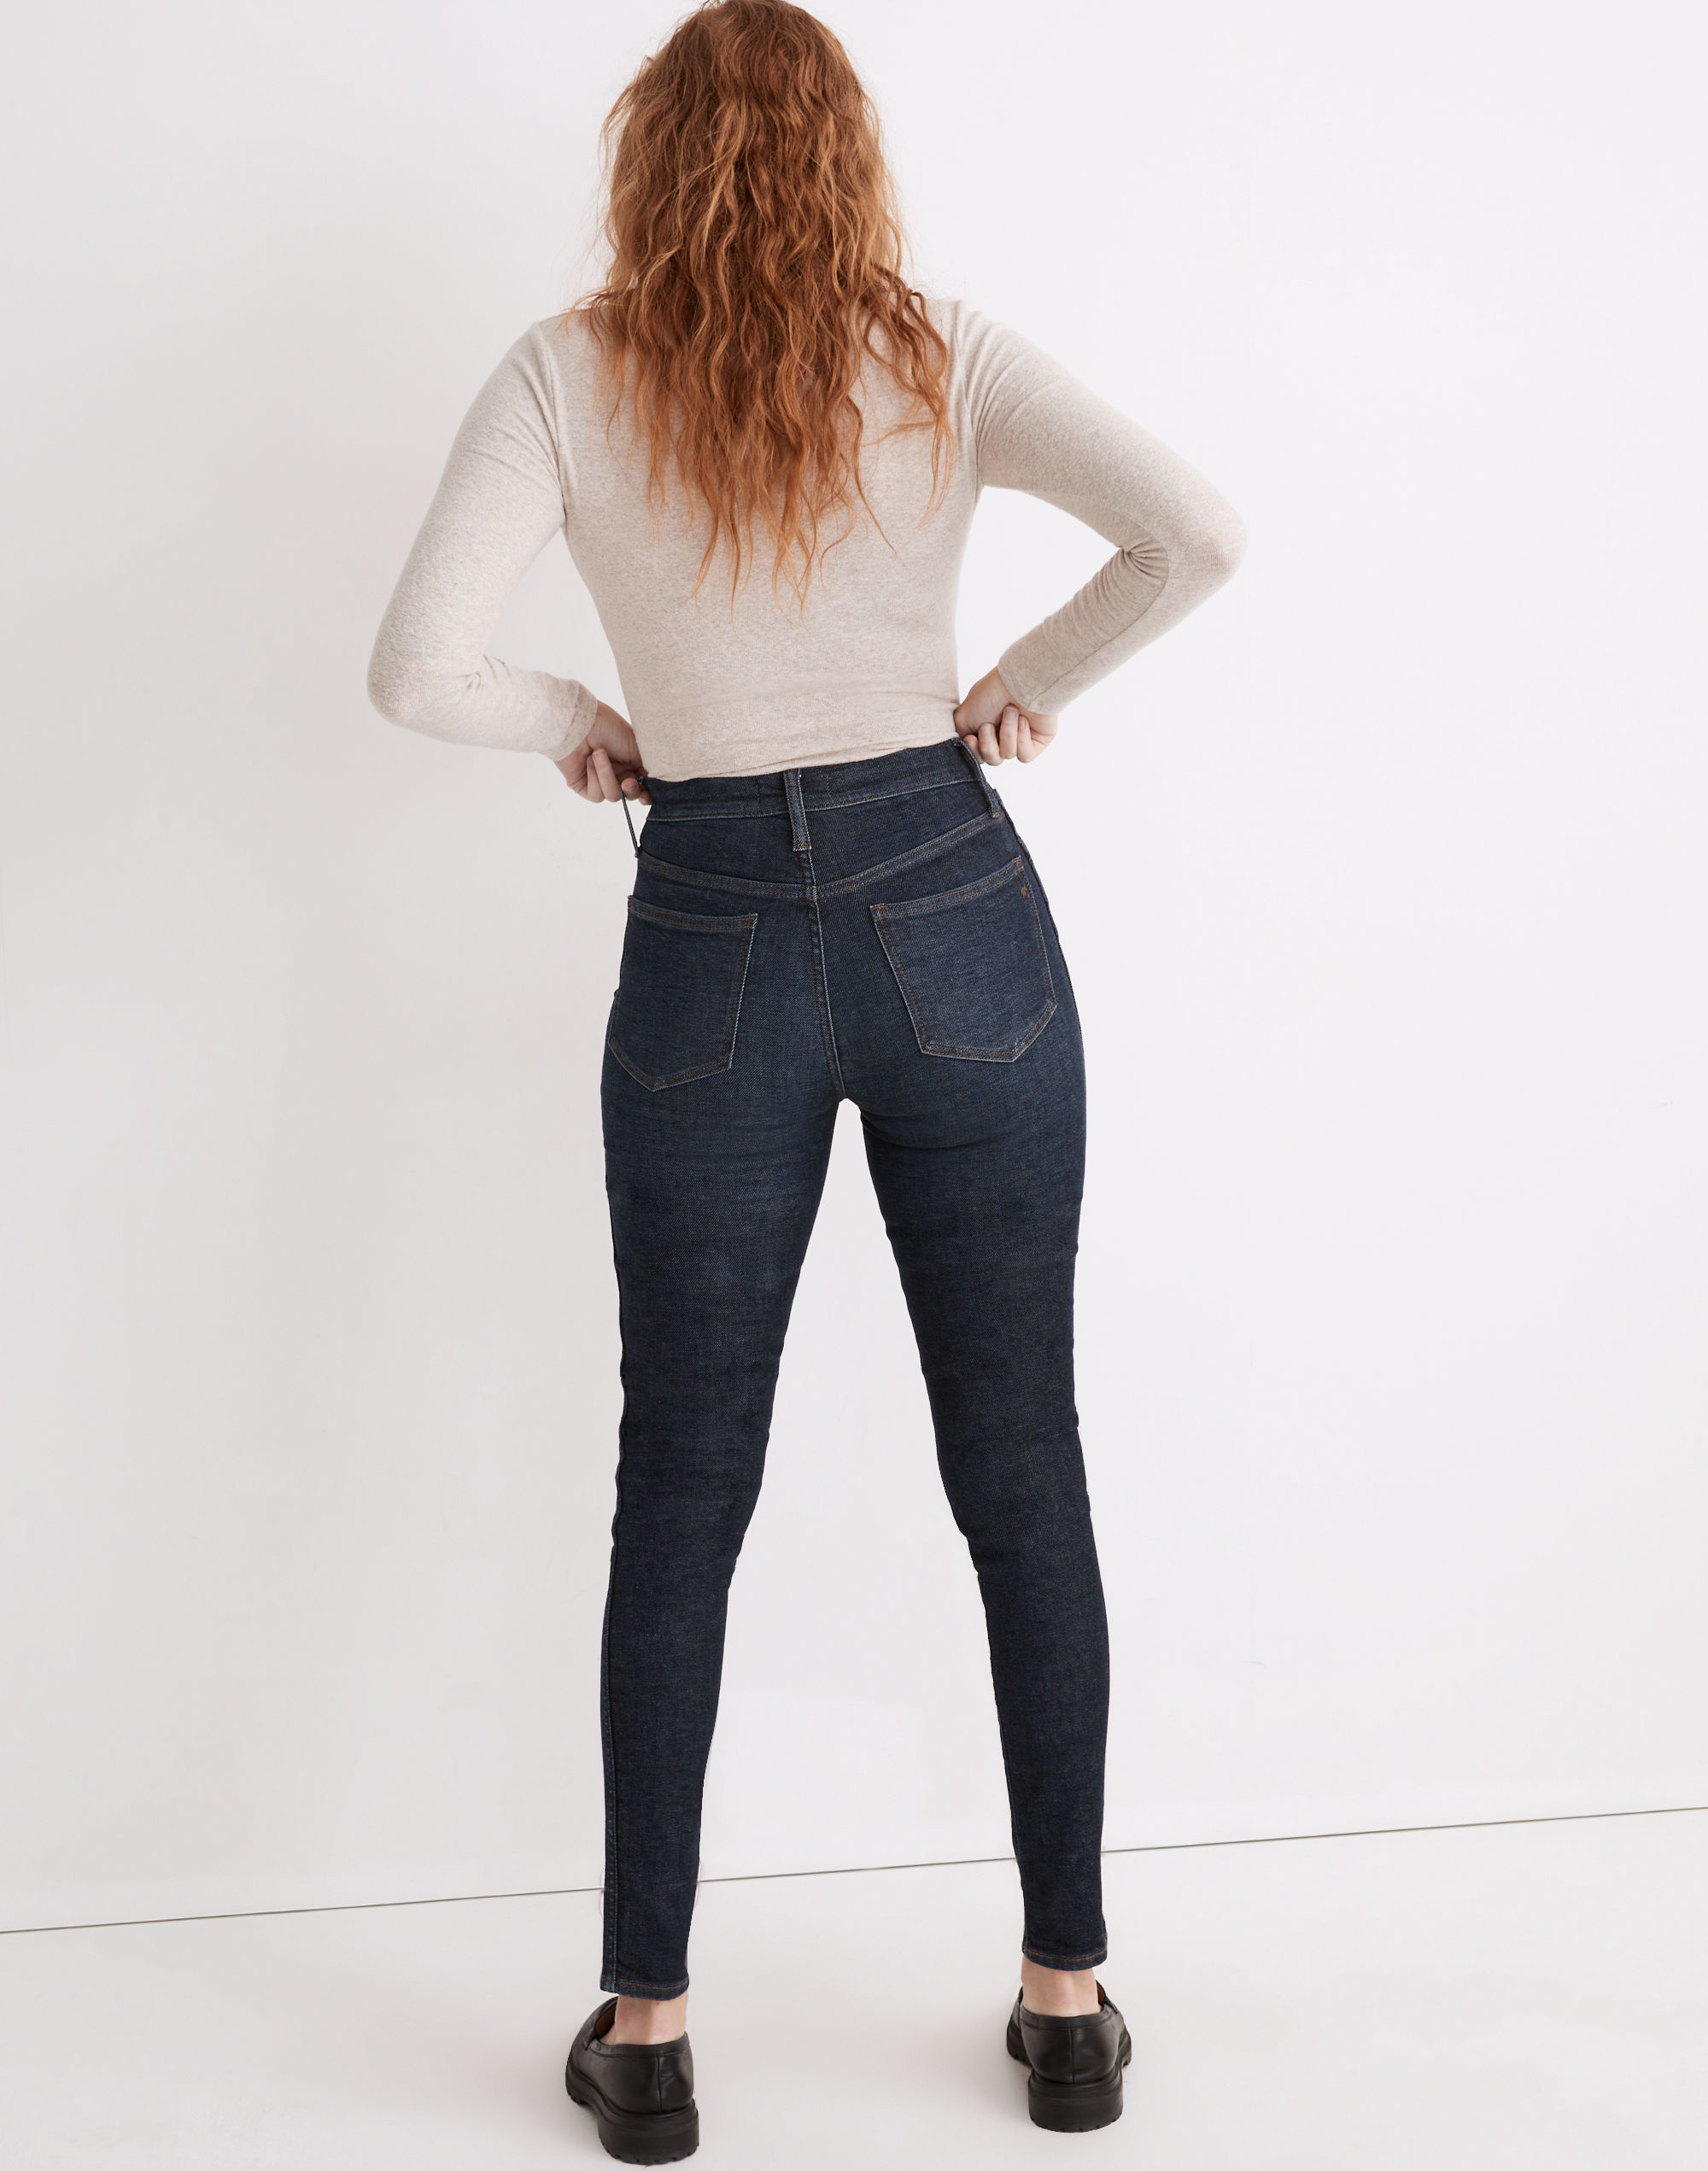 10" High-Rise Skinny Jeans in Dalesford Wash